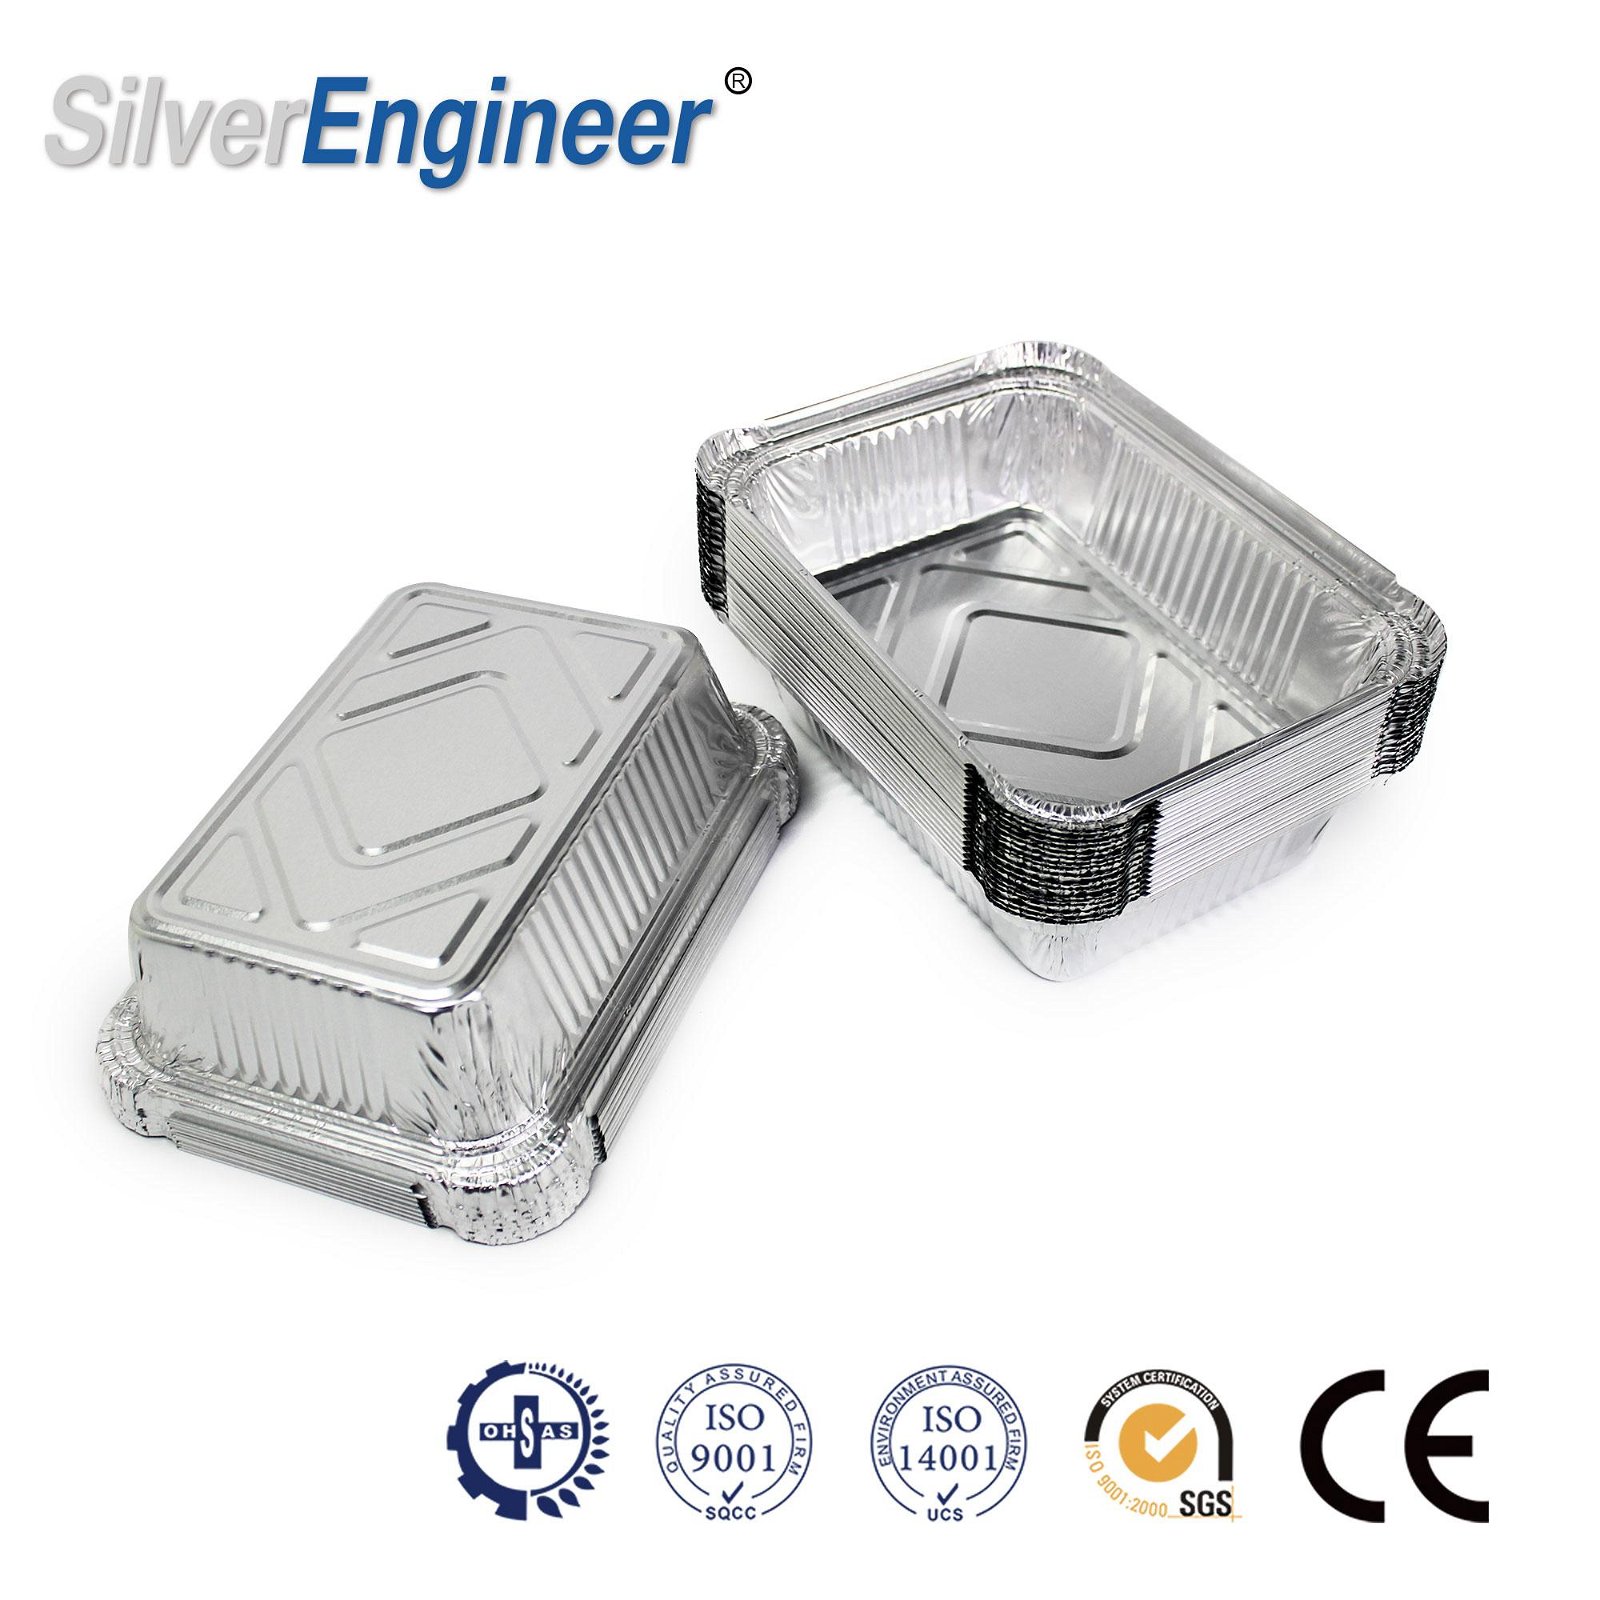 Rectangular Container Mould